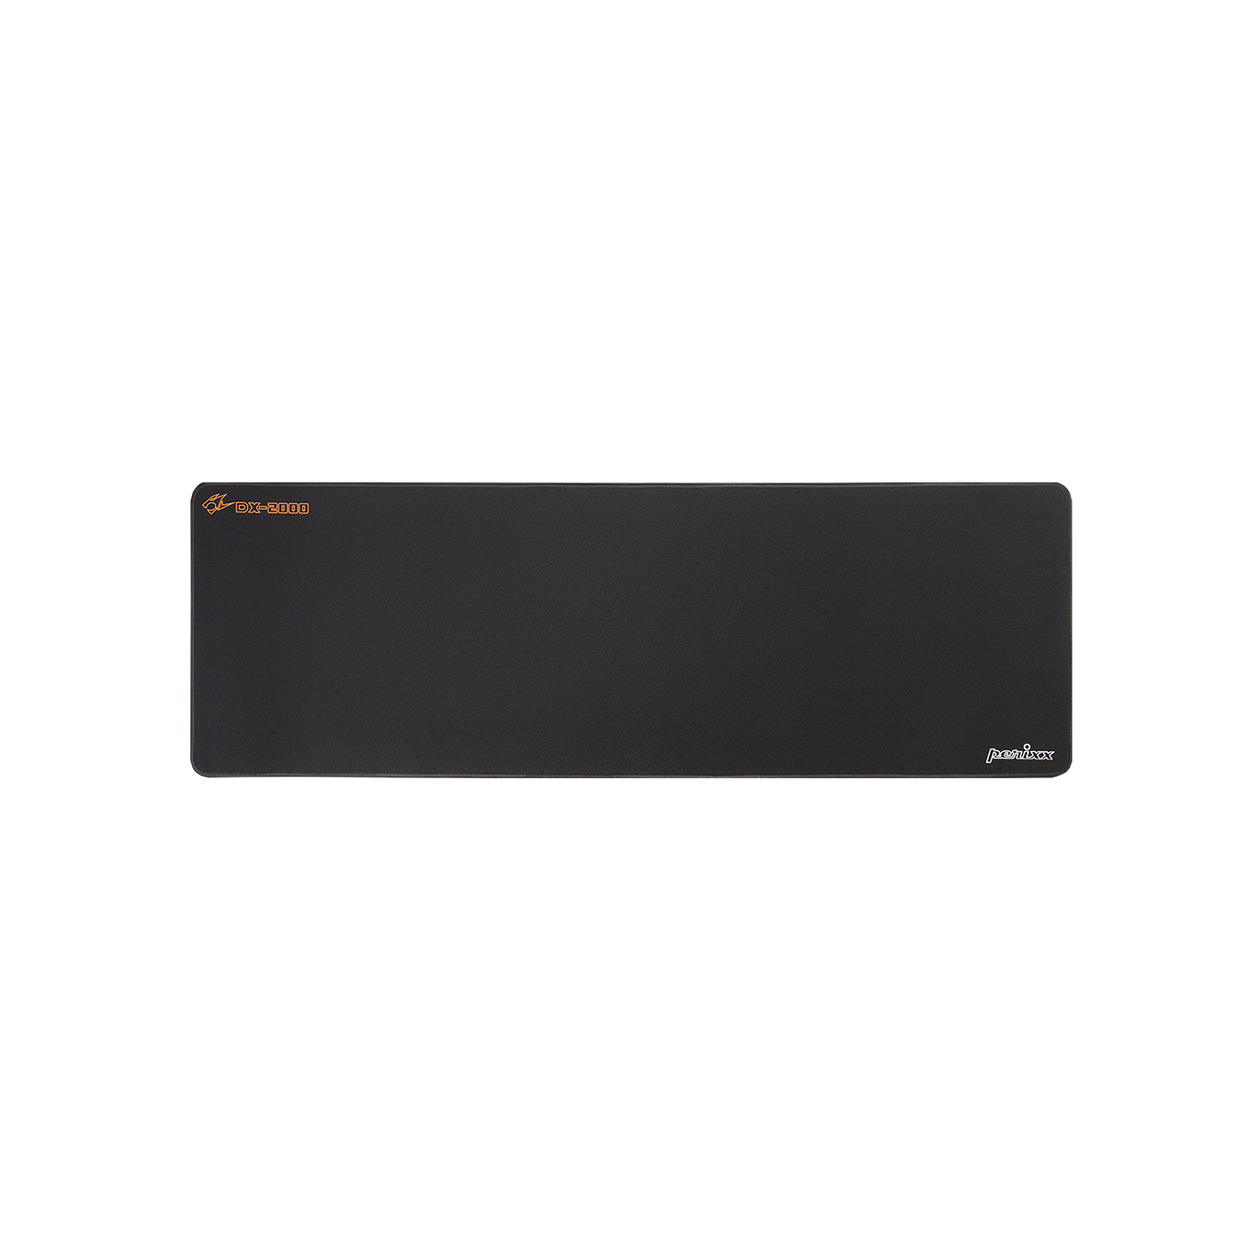 Perixx DX-2000 - XXL Gaming Mouse Pad w Stitched Edges and